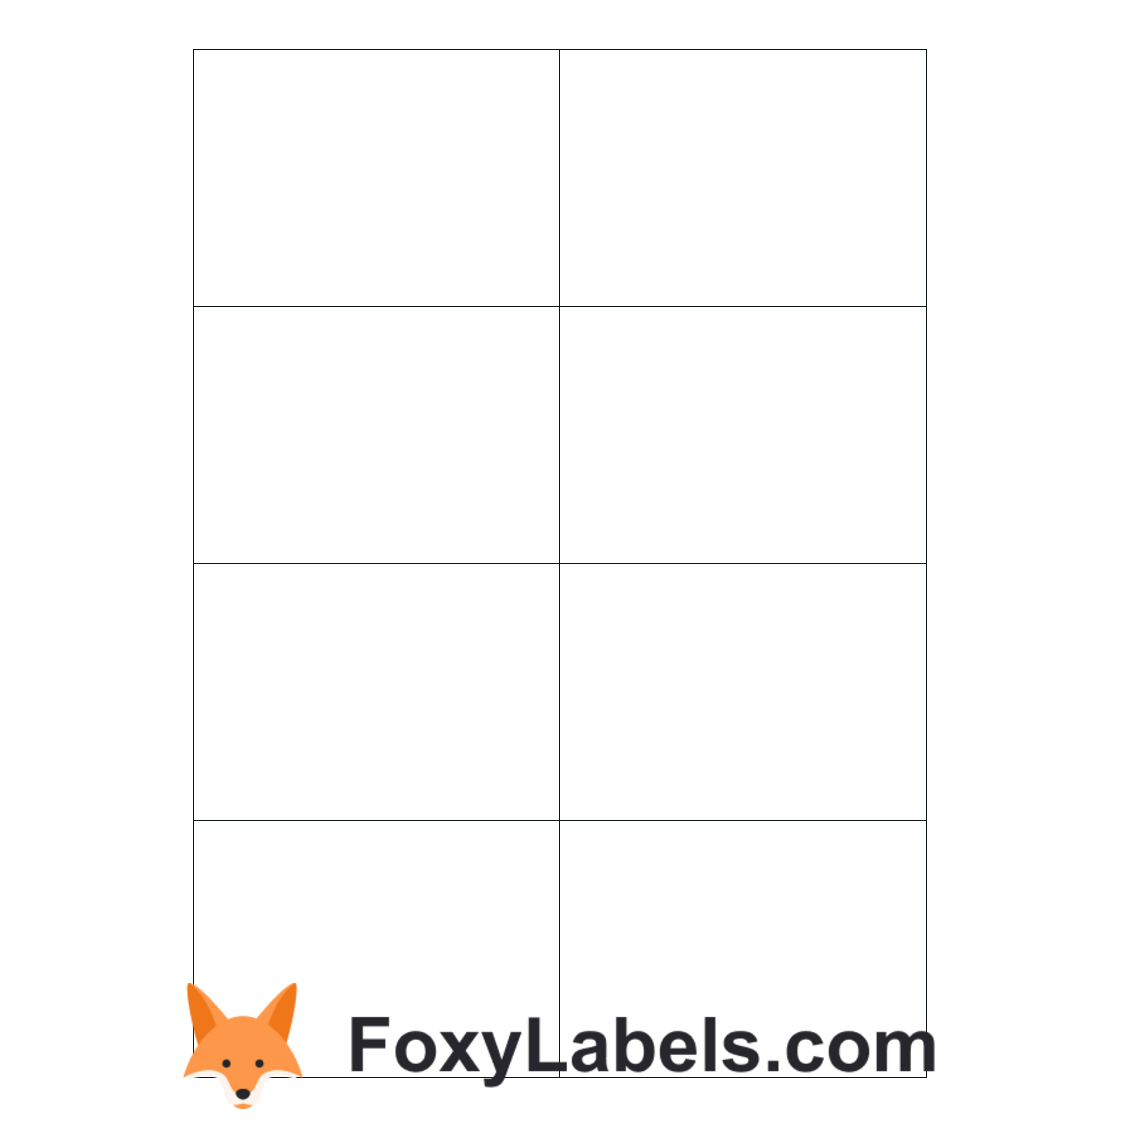 Avery-Zweckform 4782 label template for Google Docs